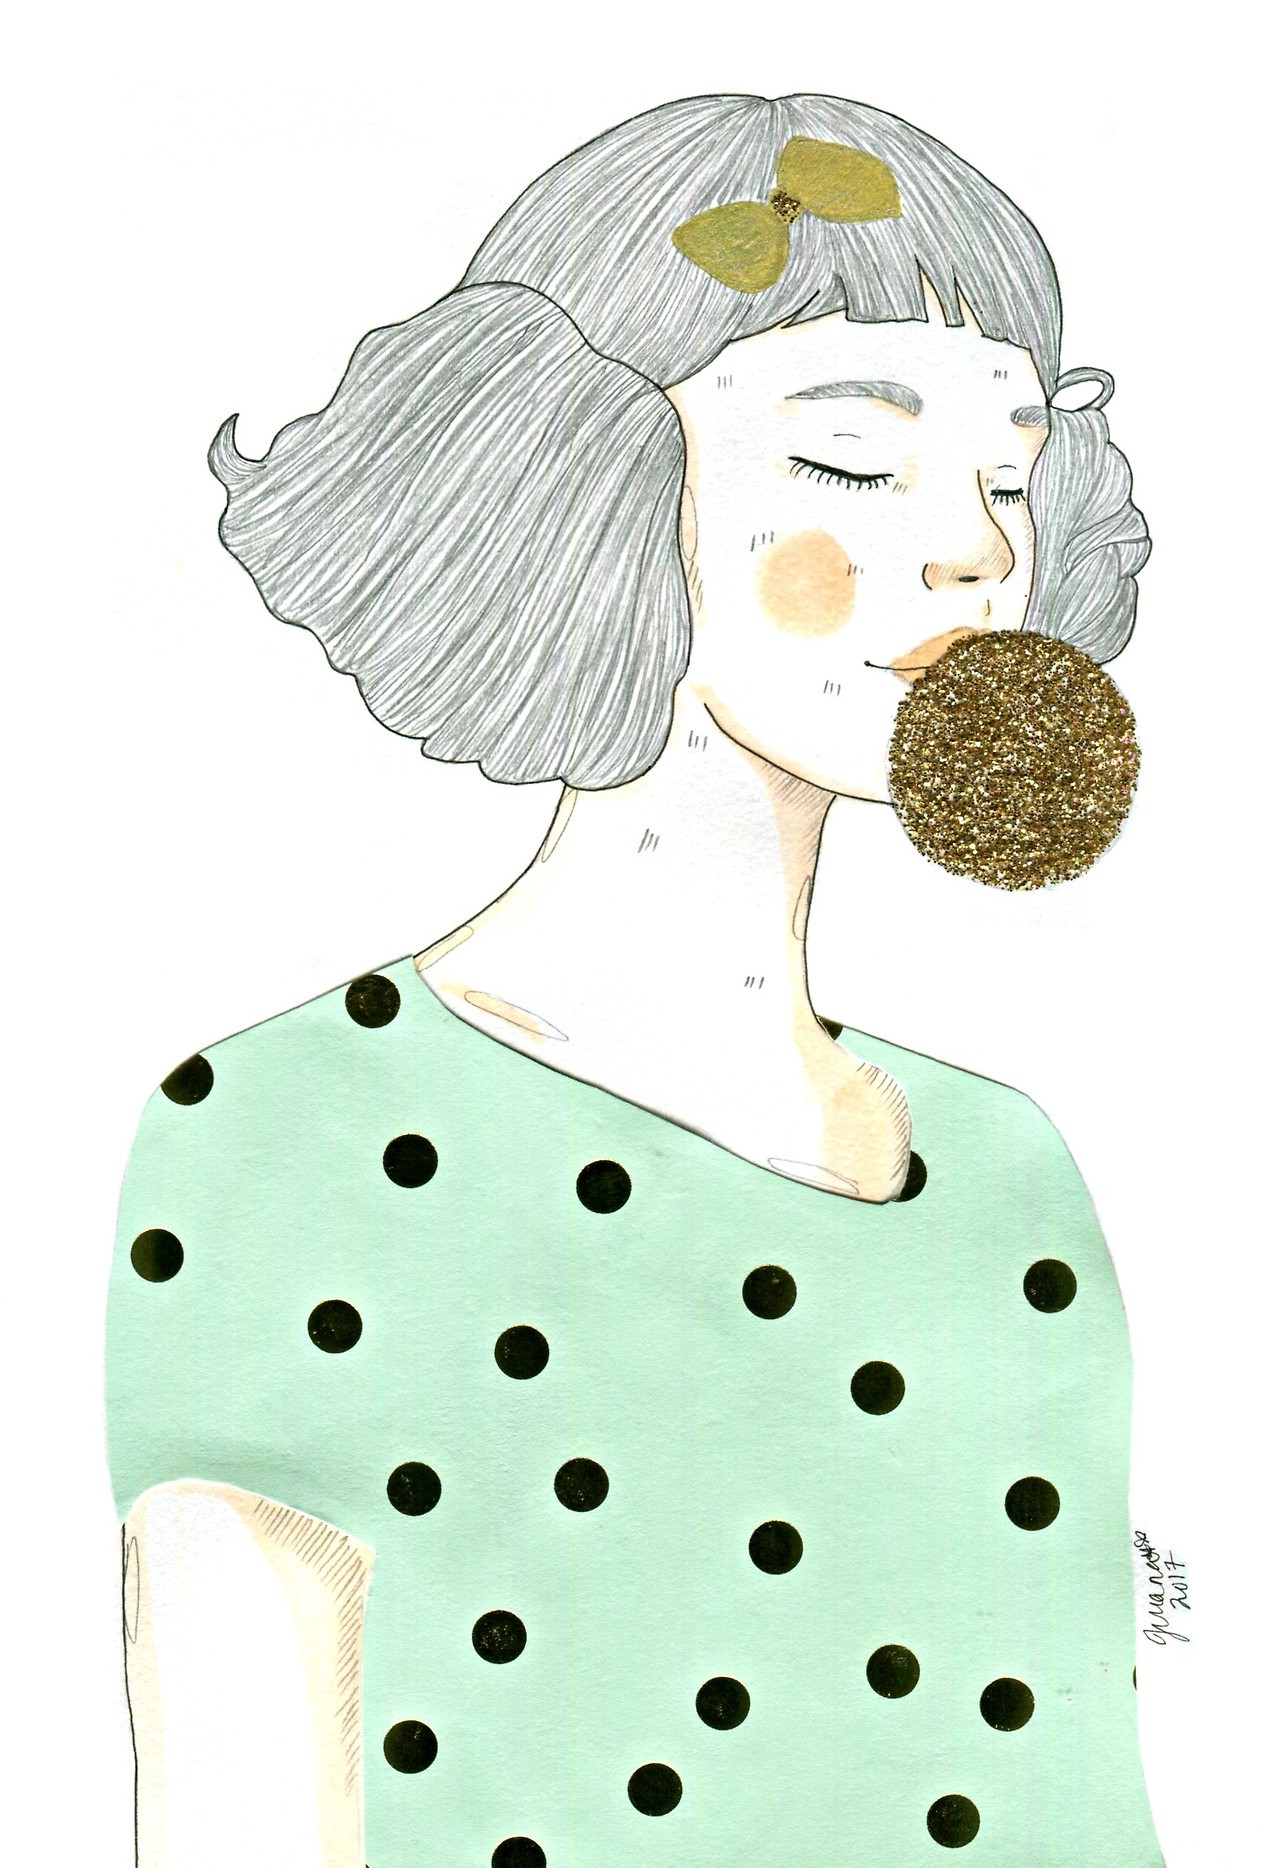 FAYE Mixed Media: pencil, micron pen, gold sharpie marker, gold glitter, and paper-craft http://jlichiarts.tumblr.com/ https://www.etsy.com/shop/JLichiArts — EatSleepDraw is working on something new and we want you to be the first to know about it....